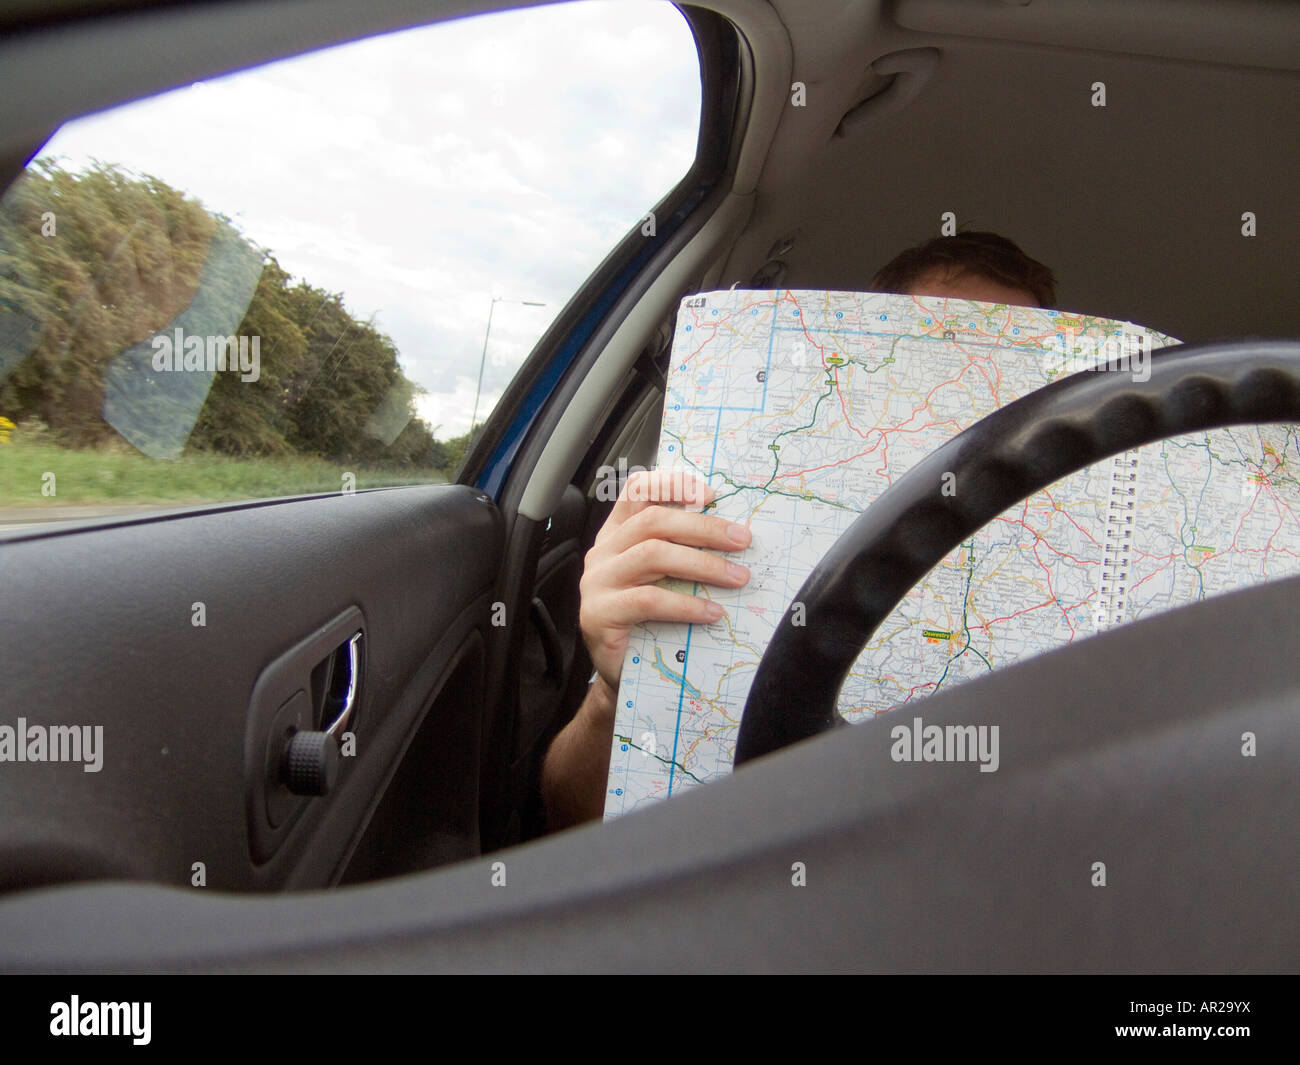 A driver drives a car whilst reading a map for directions, close up view from interior Stock Photo